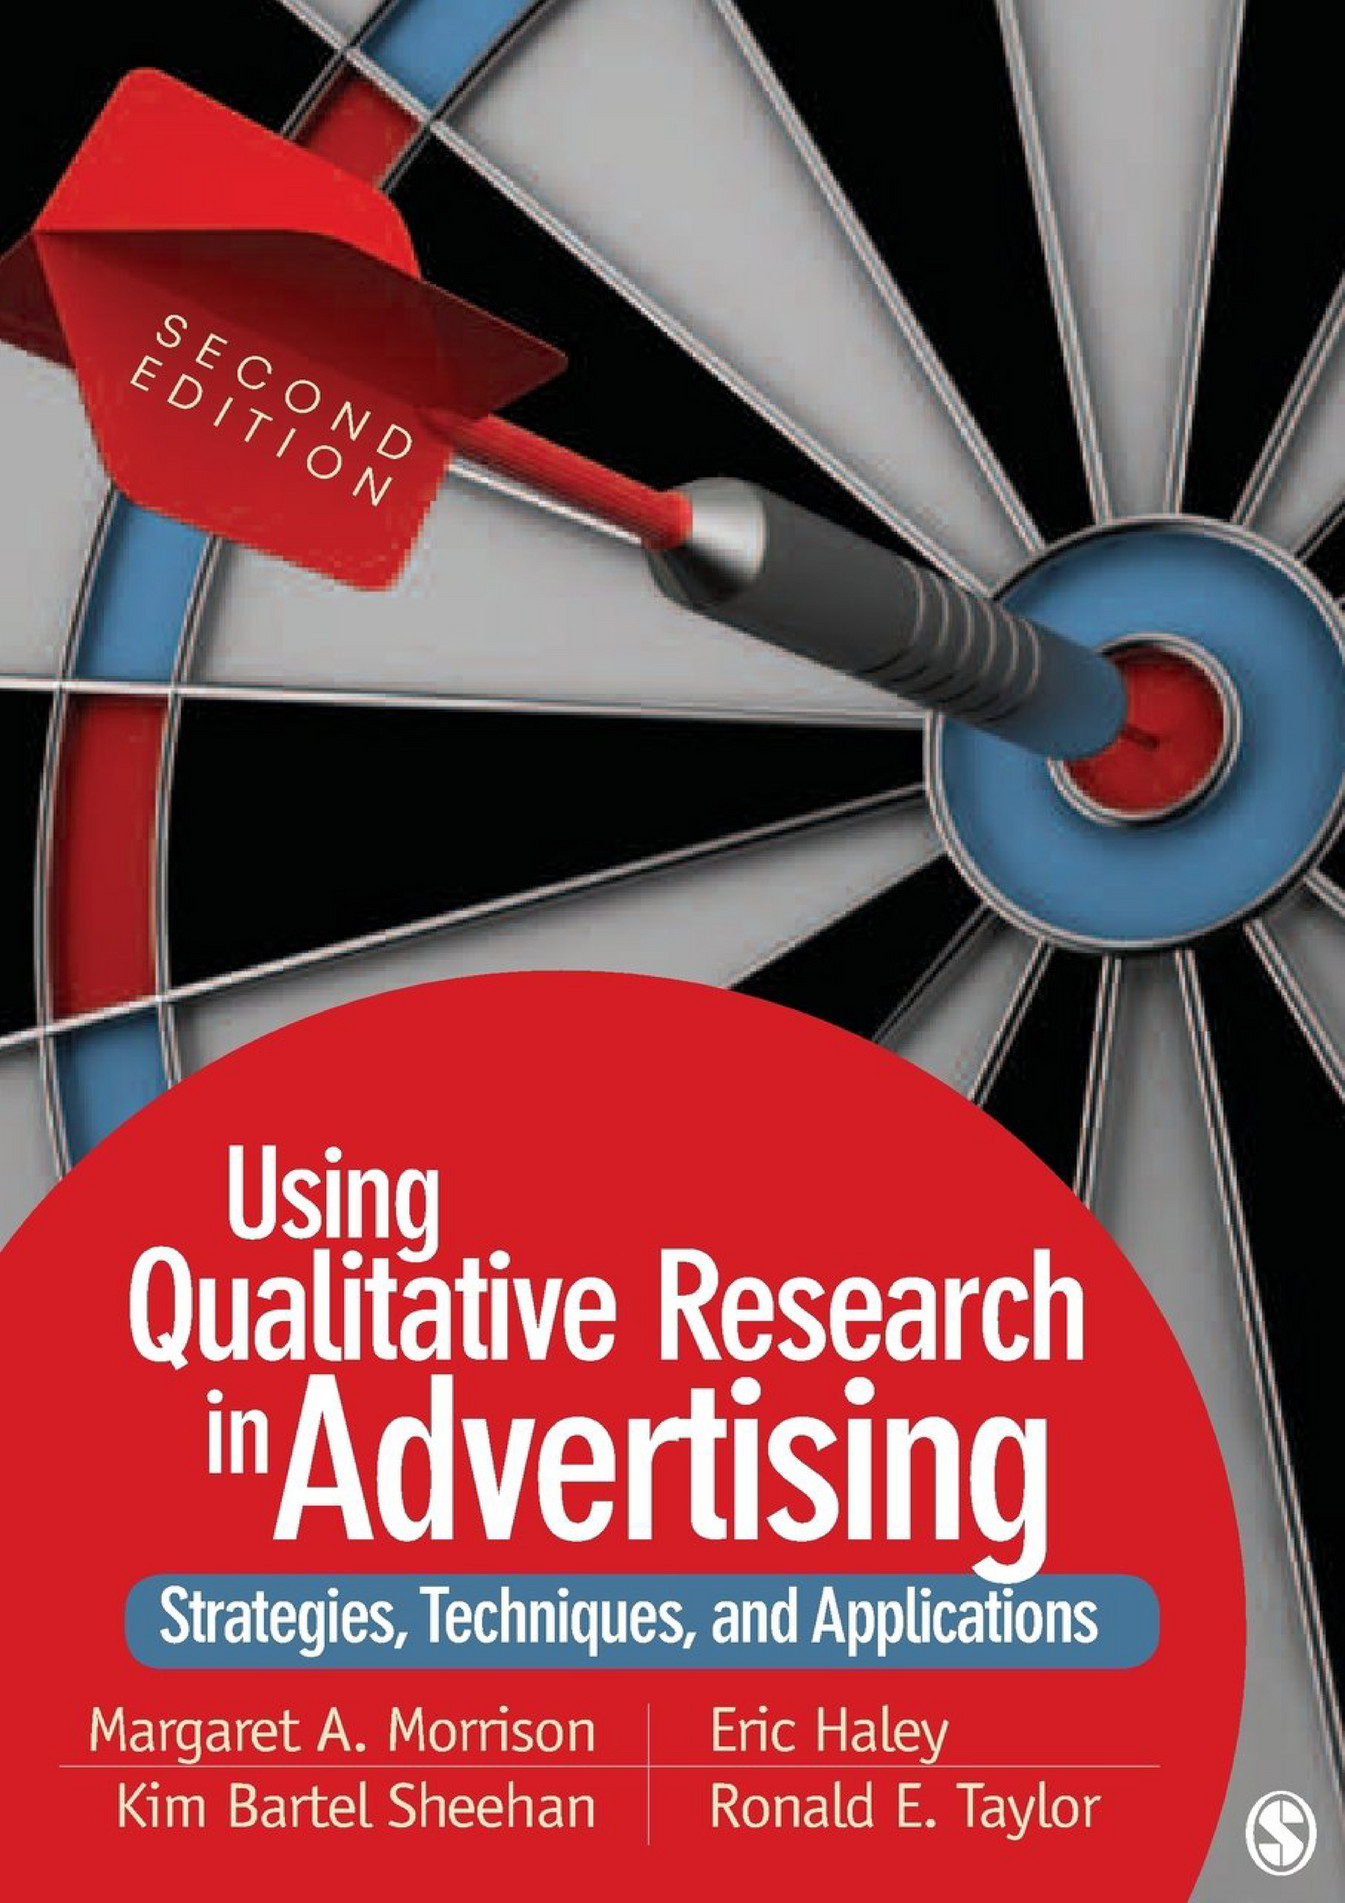 effectiveness of advertising research paper